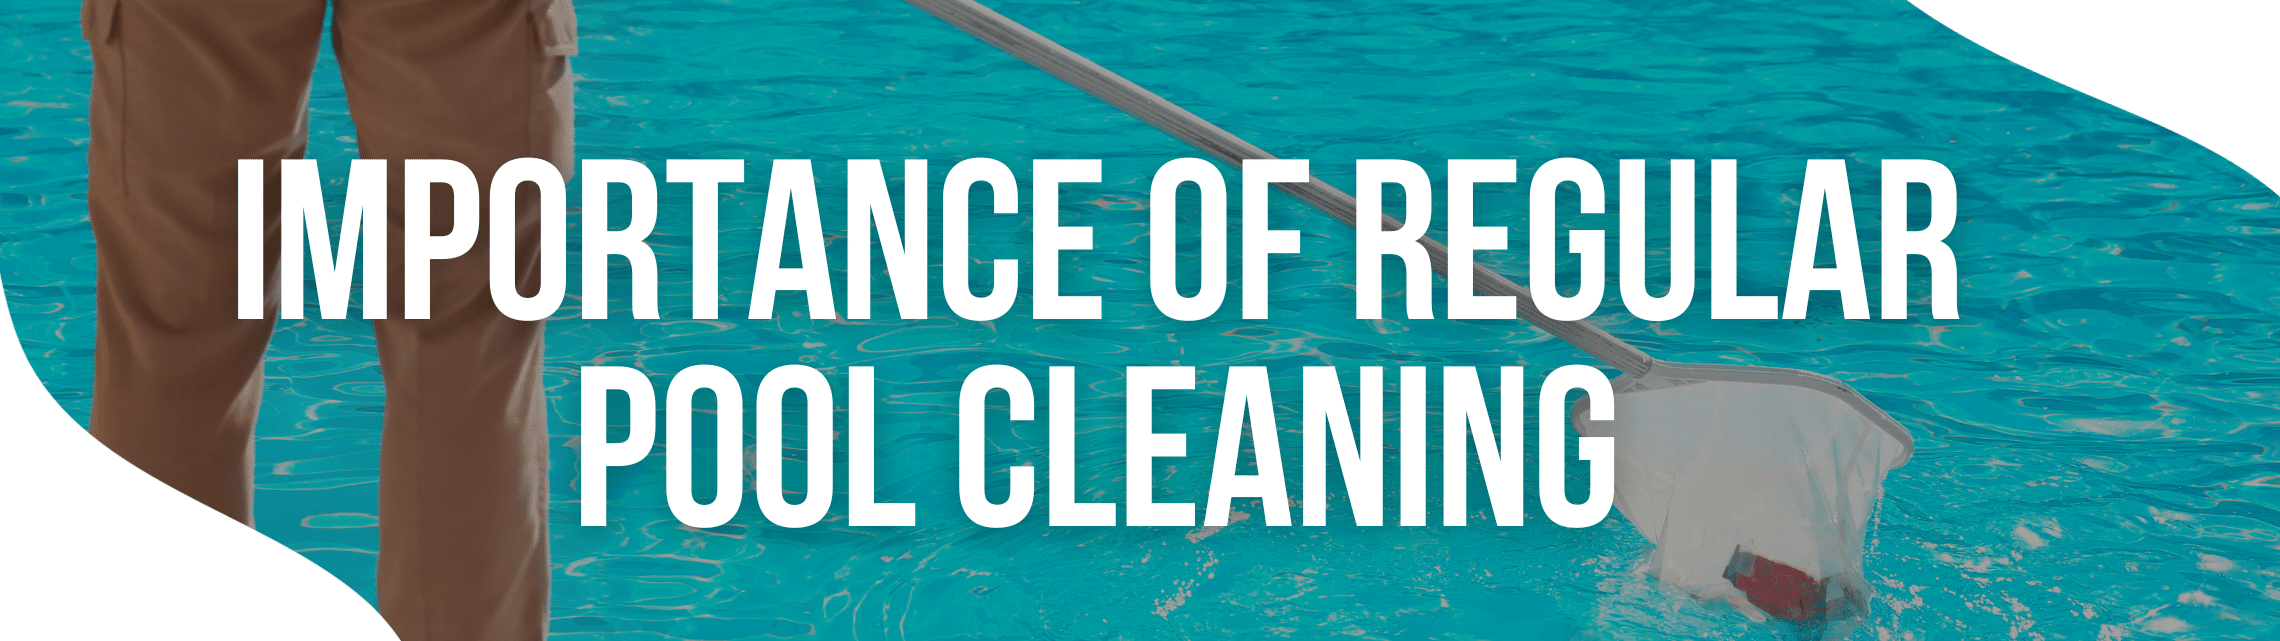 The Importance of Regular Pool Cleaning Dallas